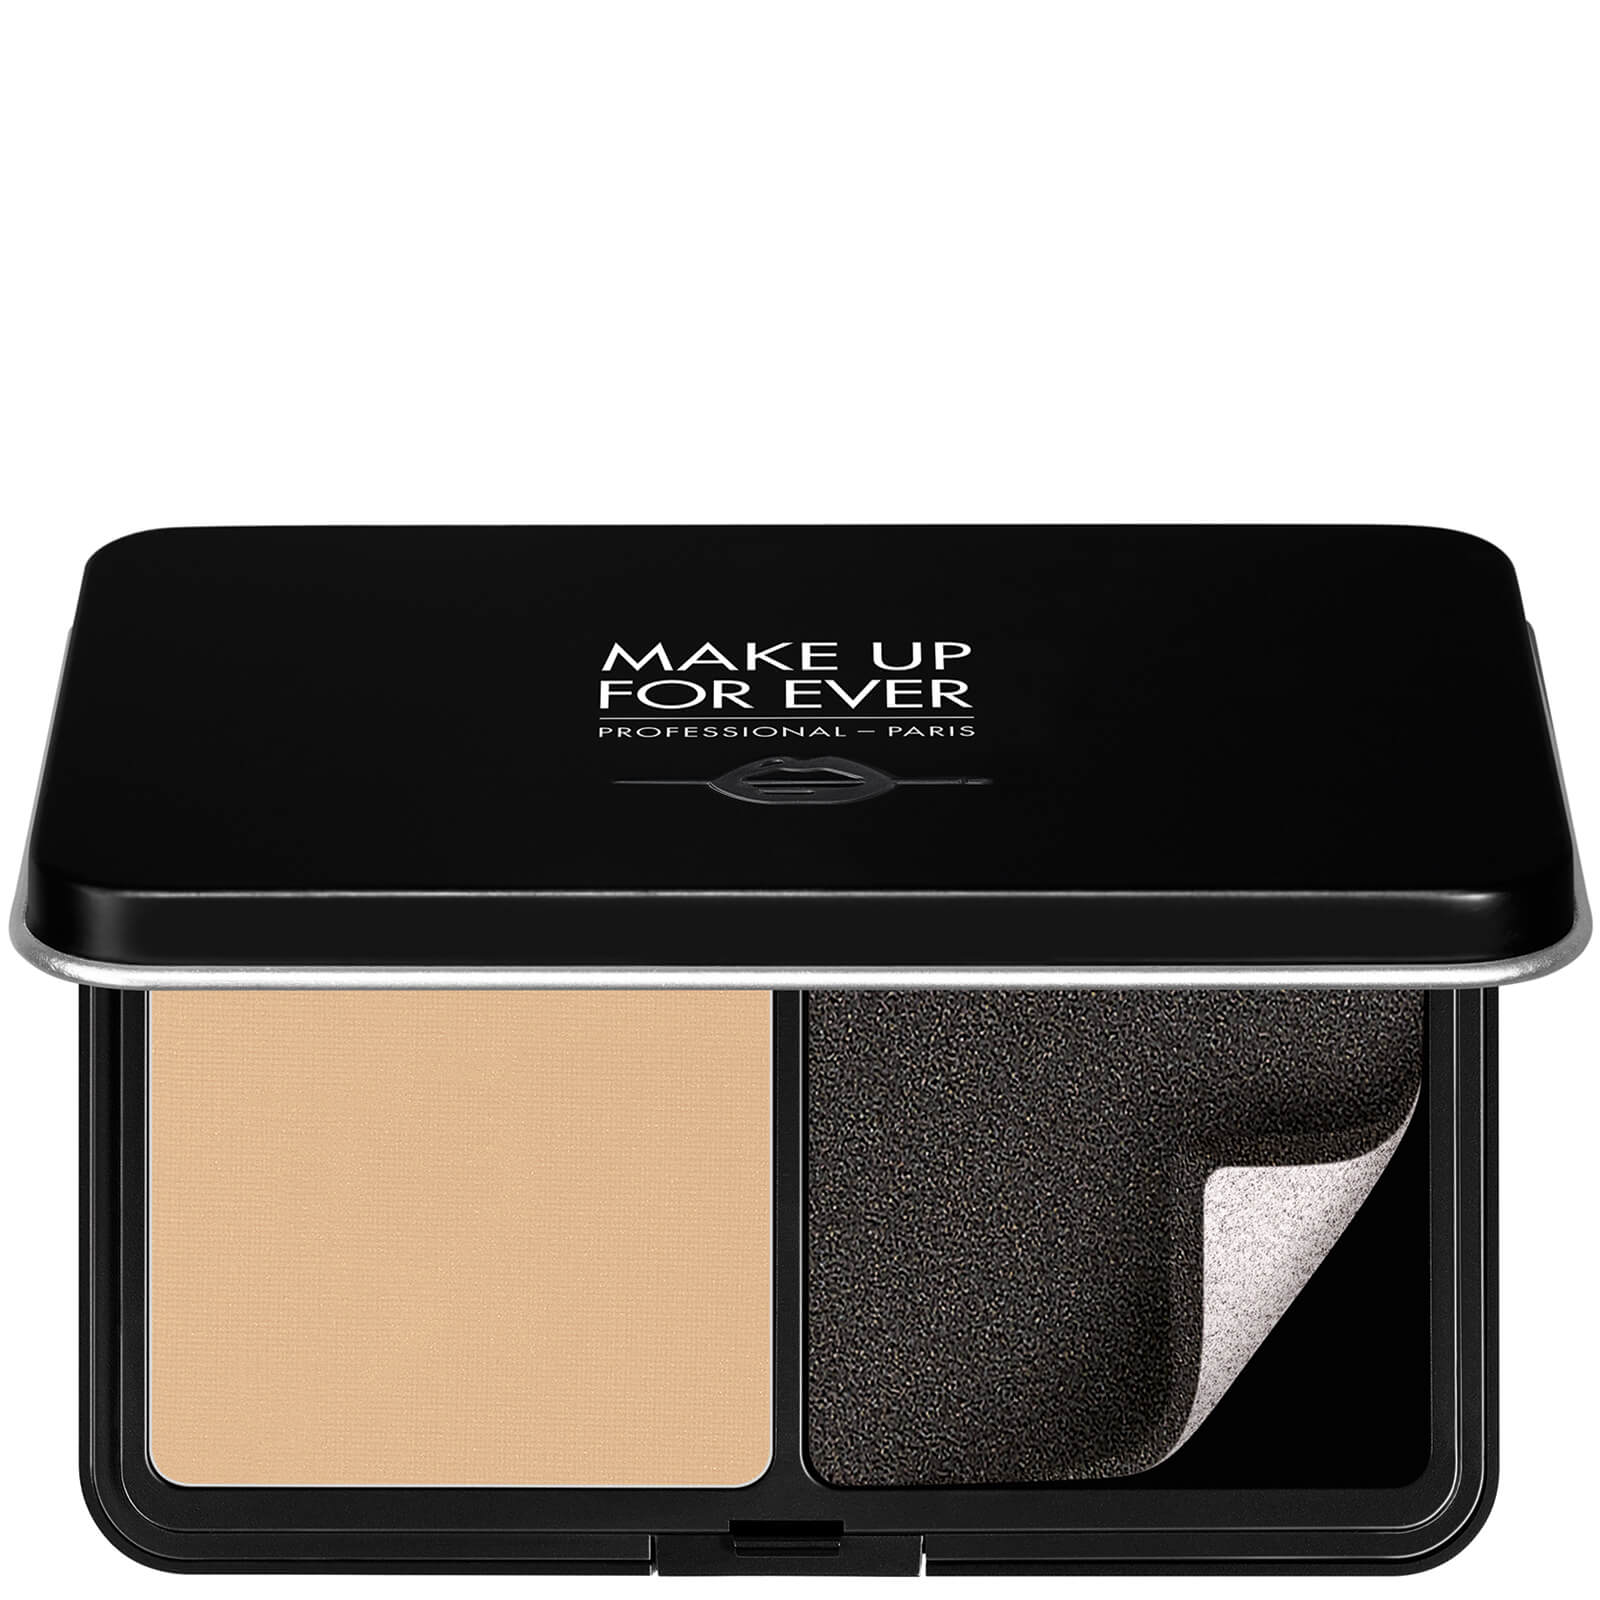 MAKE UP FOR EVER matte Velvet Skin Compact 11g (Various Shades) - - Y225 Marble